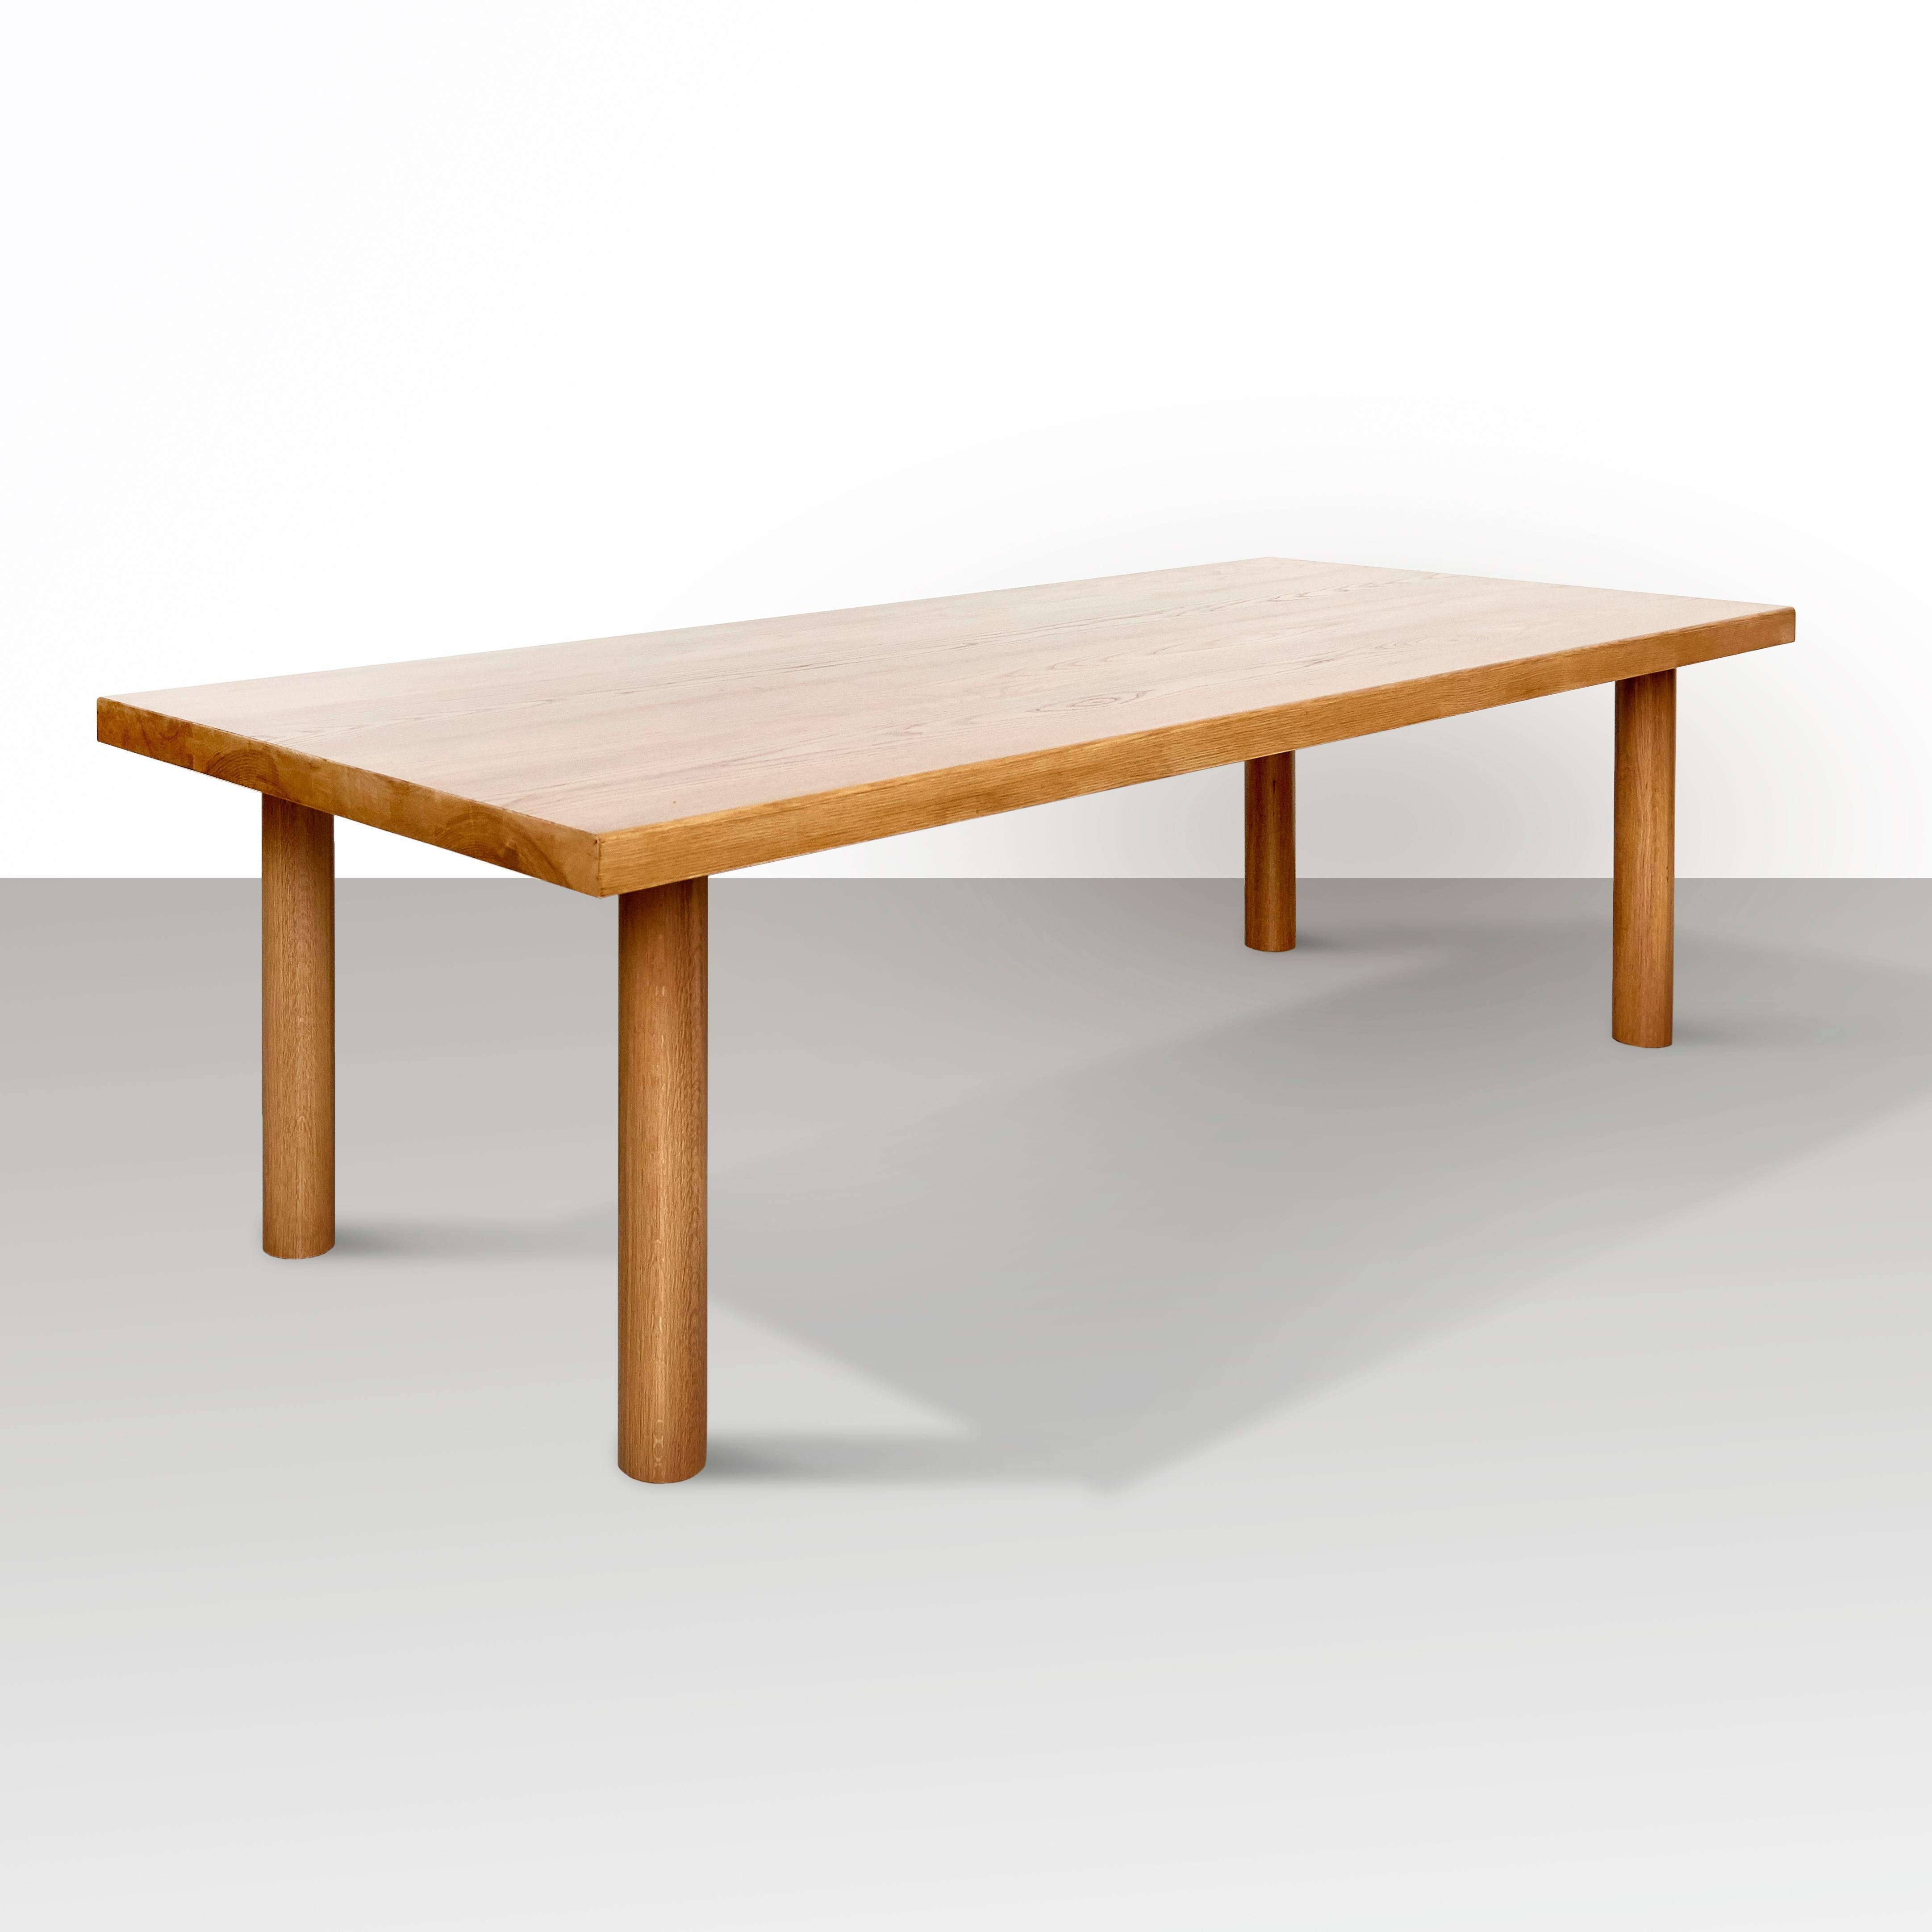 Spanish Dada Est. Contemporary Solid Ash Large Dining Table